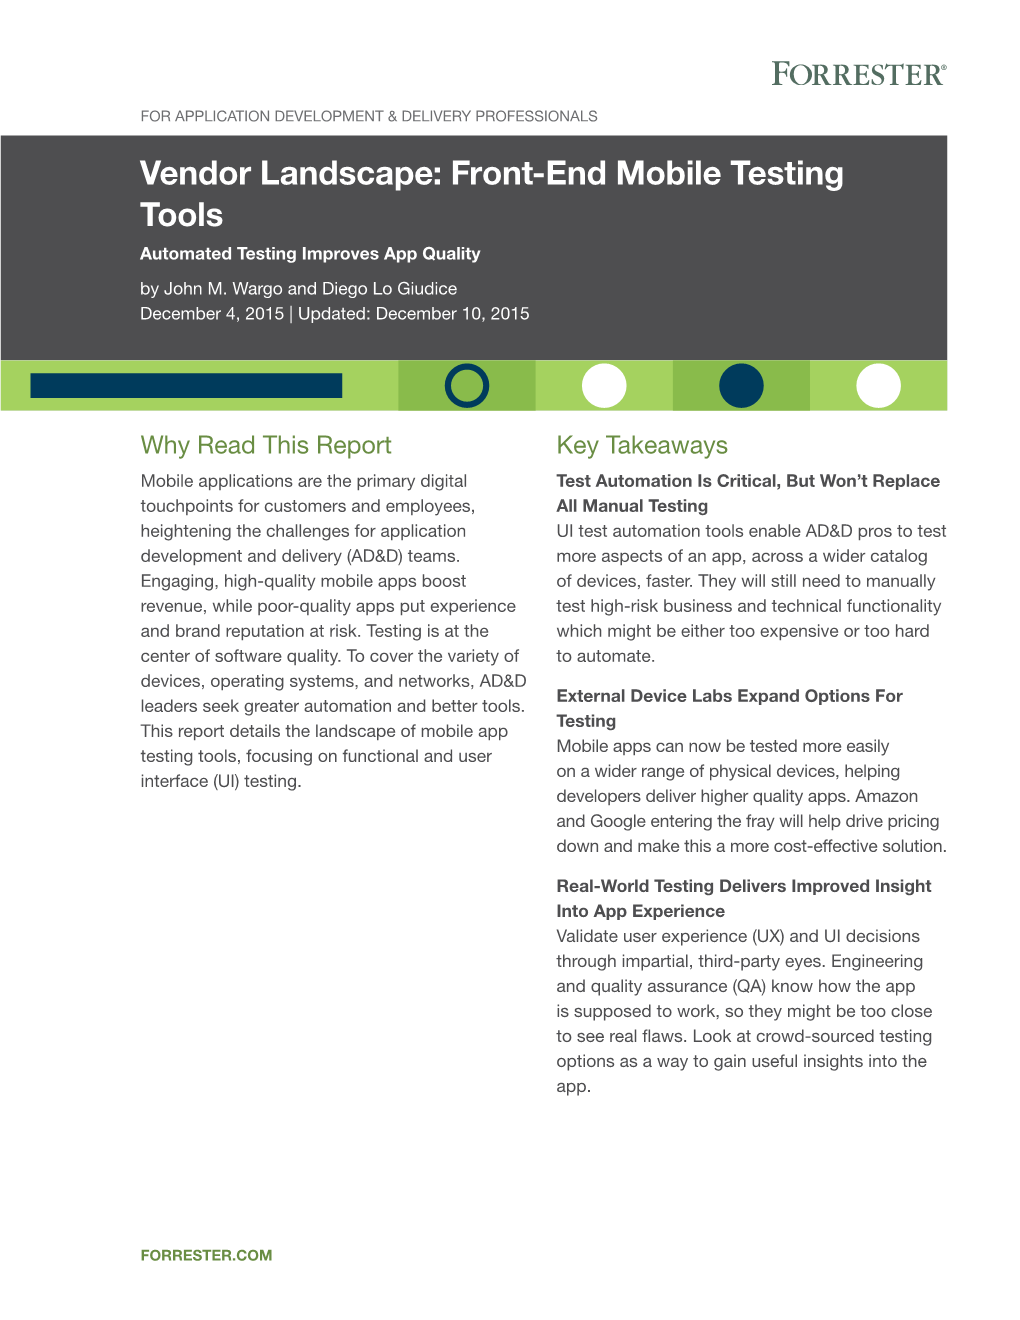 Vendor Landscape: Front-End Mobile Testing Tools Automated Testing Improves App Quality by John M